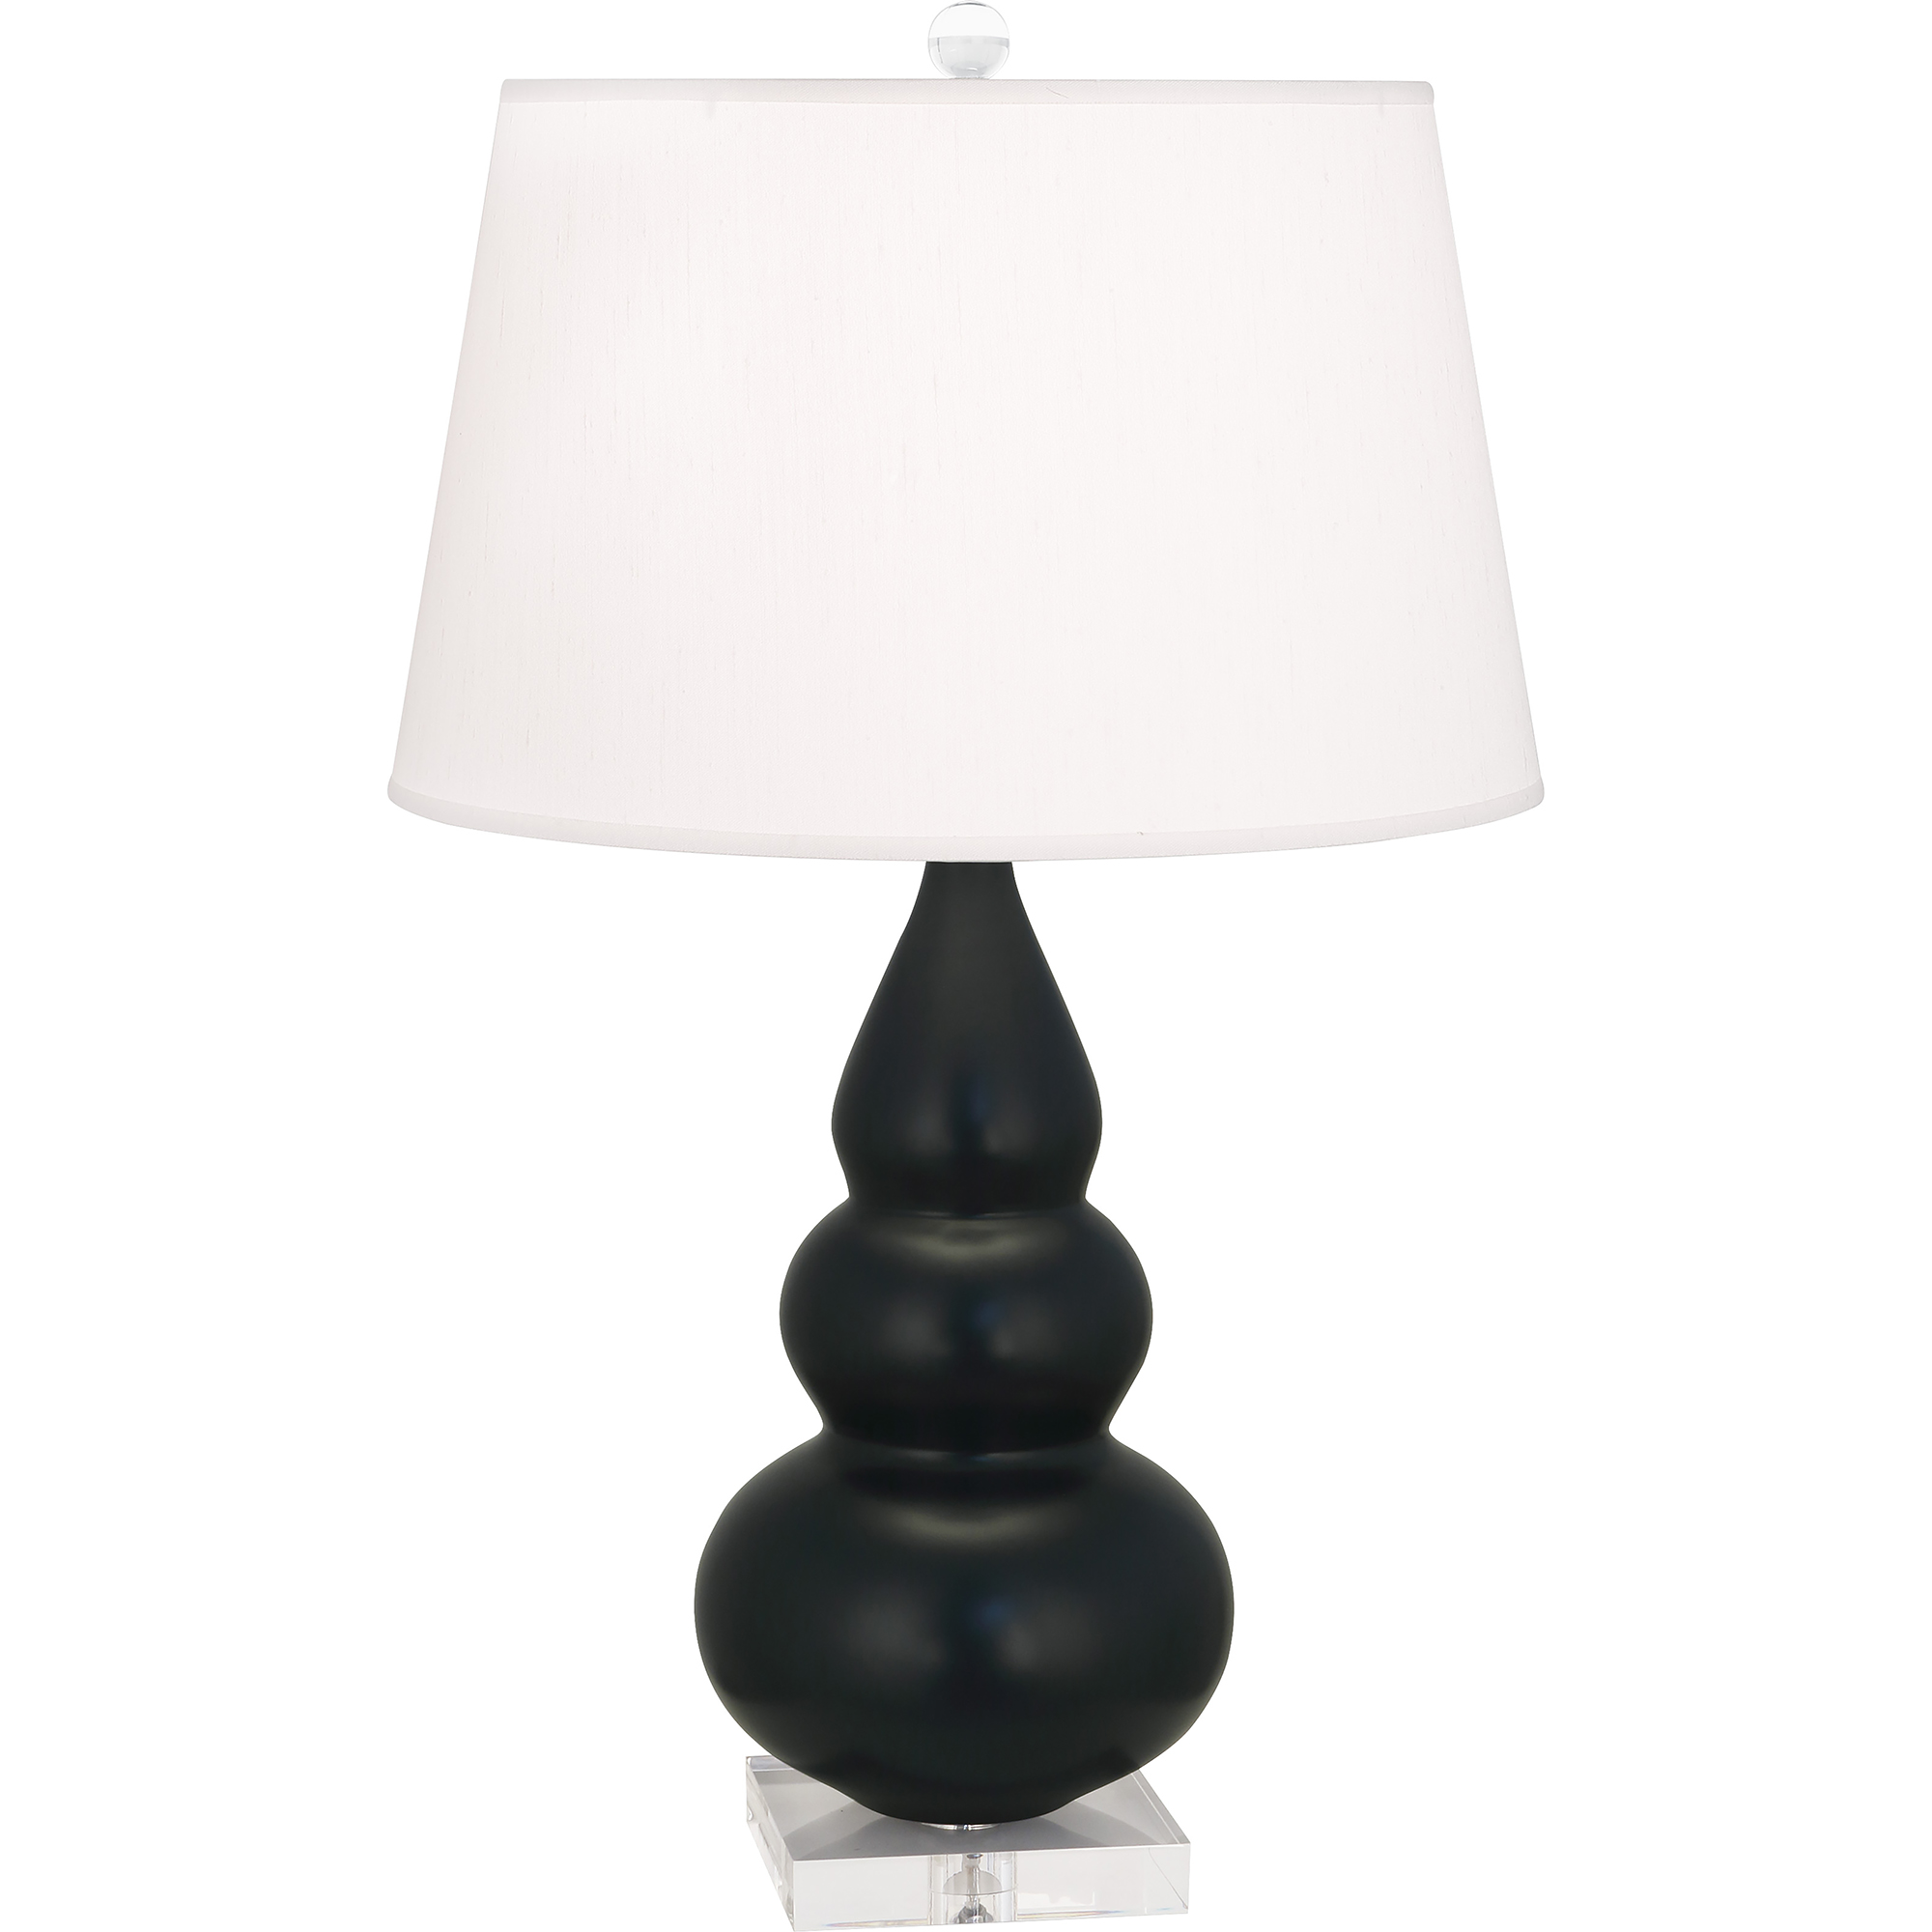 Small Triple Gourd Accent Lamp